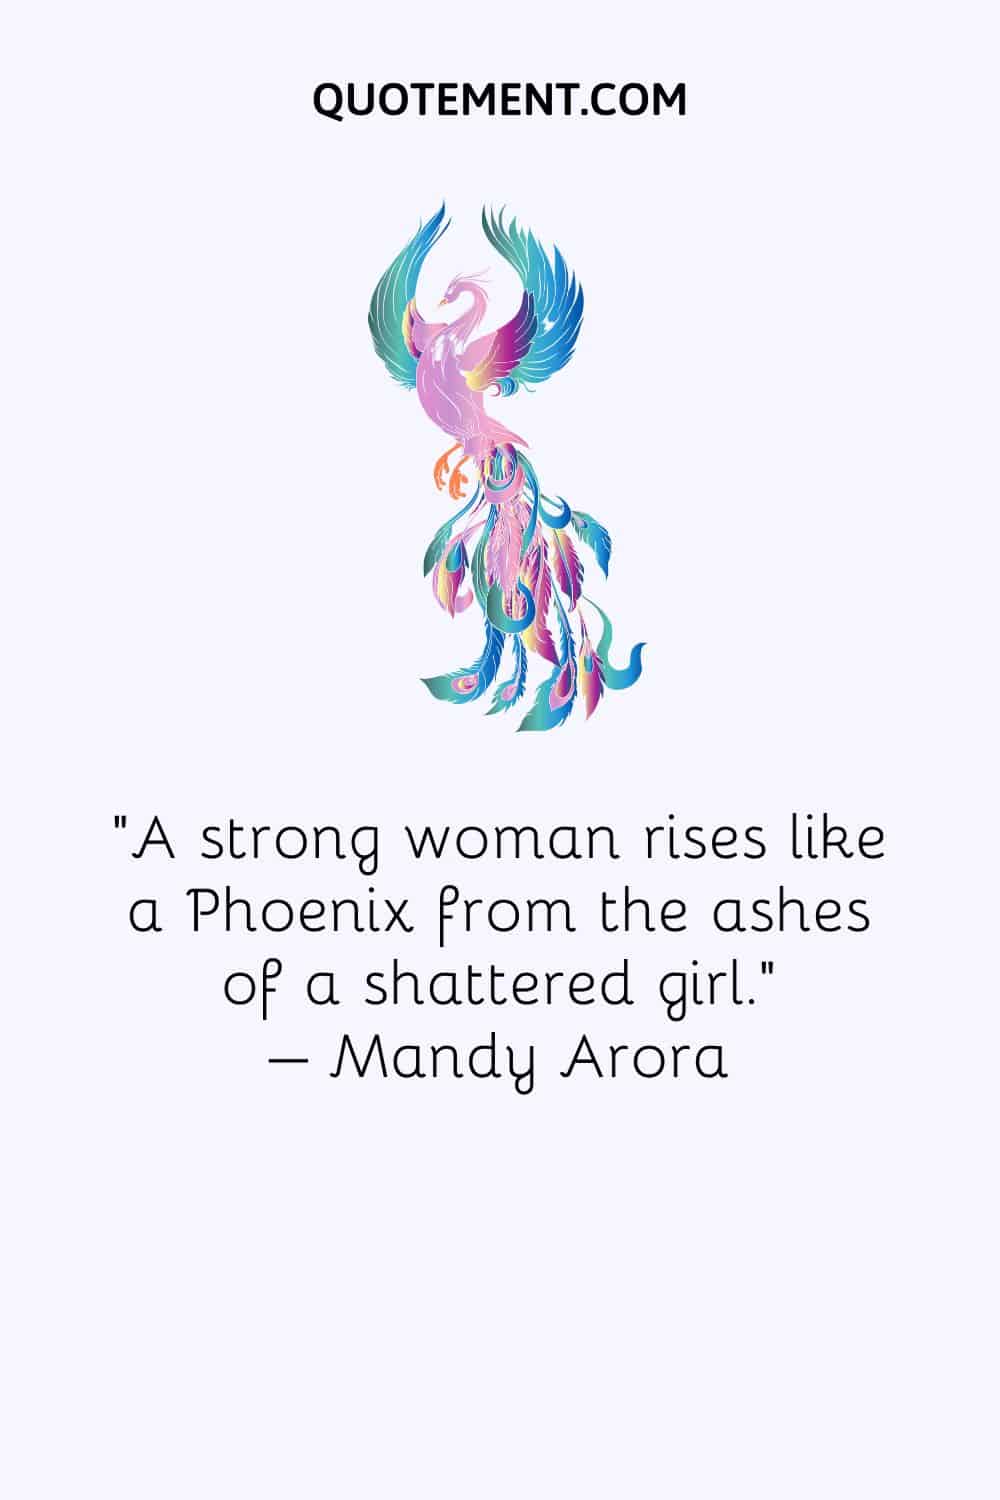 A strong woman rises like a Phoenix from the ashes of a shattered girl